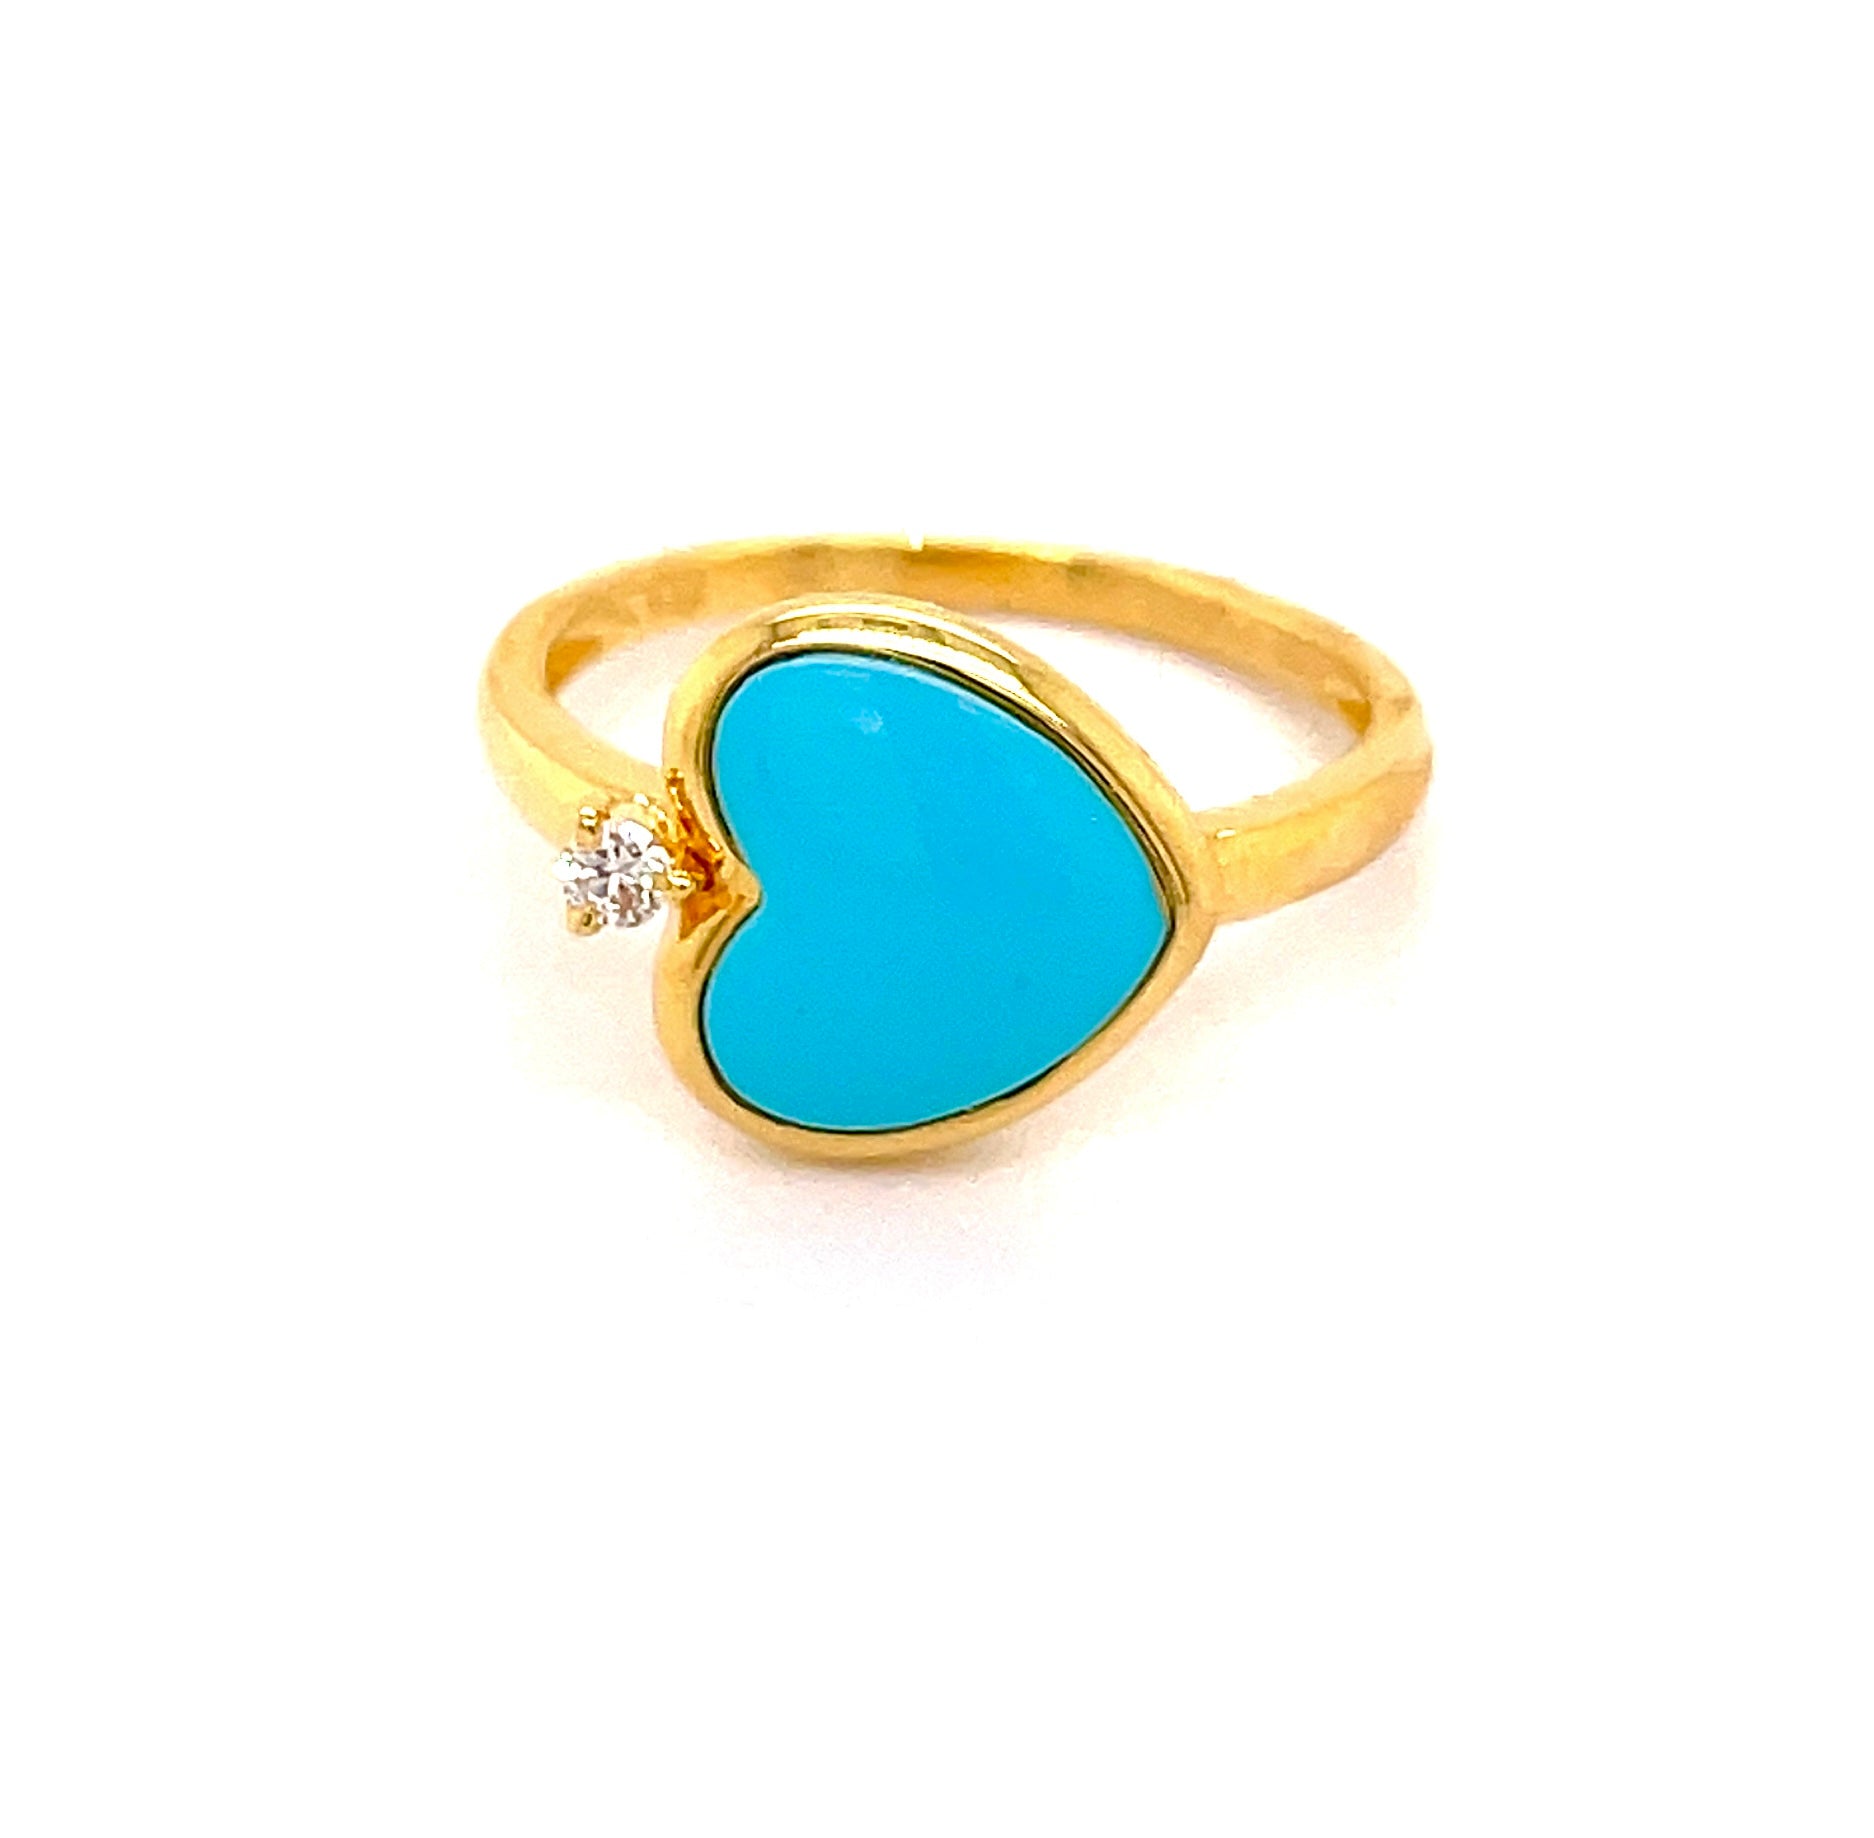 14k yellow gold  Heart shape turquoise   Size 6.5  One small diamond 0.04 cts  12.00 mm.